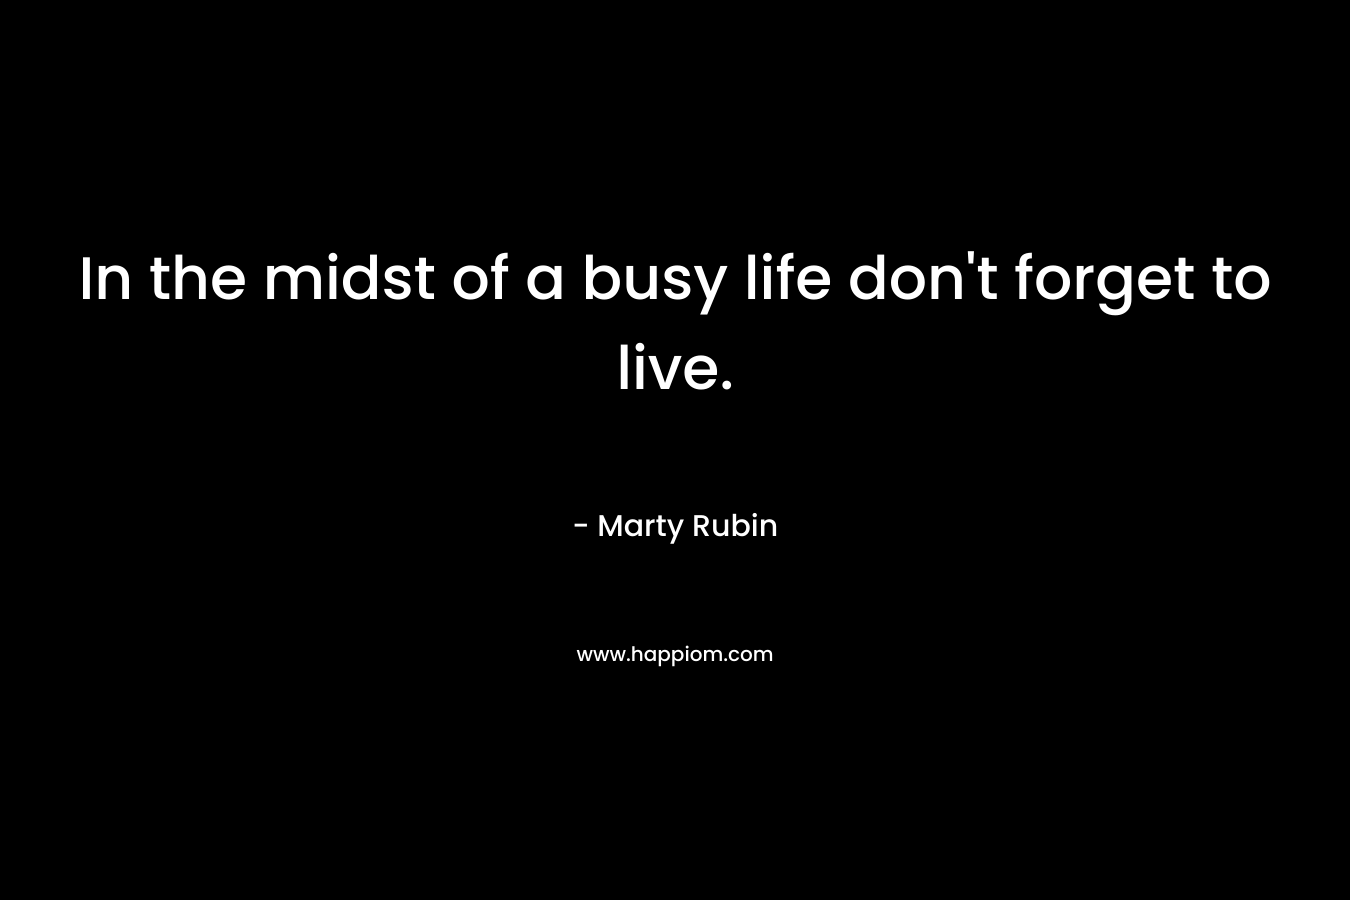 In the midst of a busy life don't forget to live.